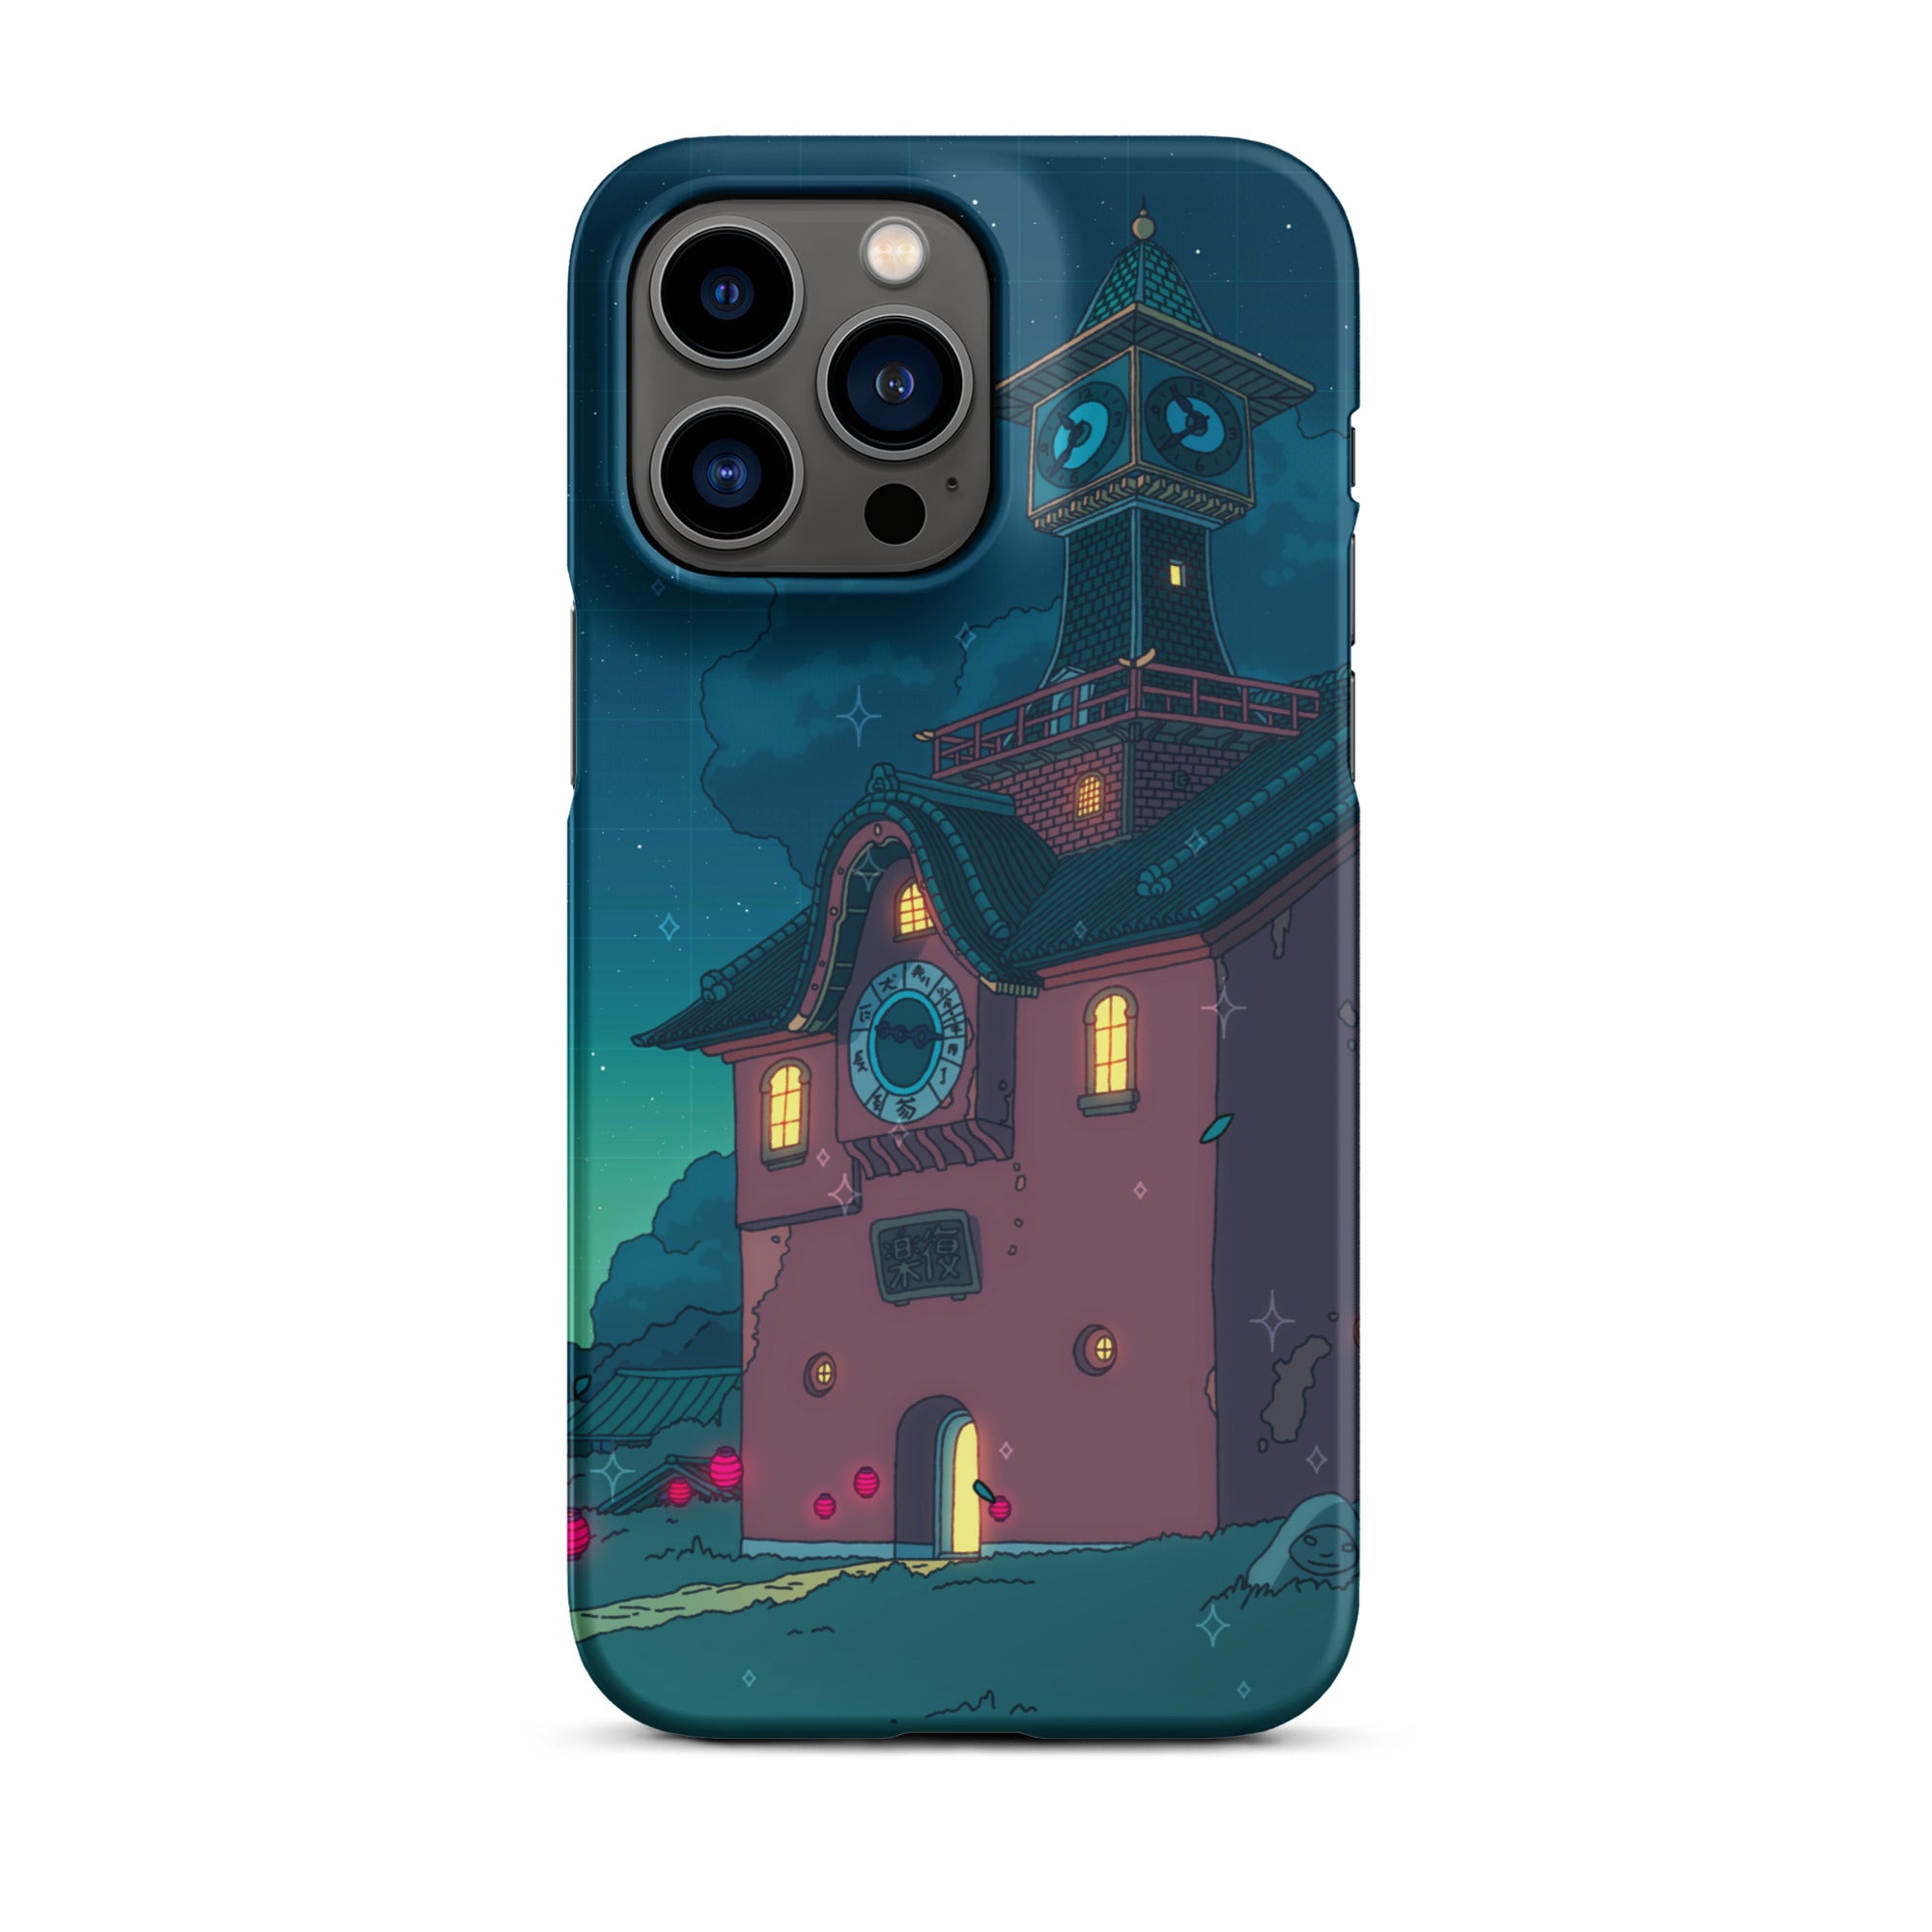 One Summer's Night iPhone Case